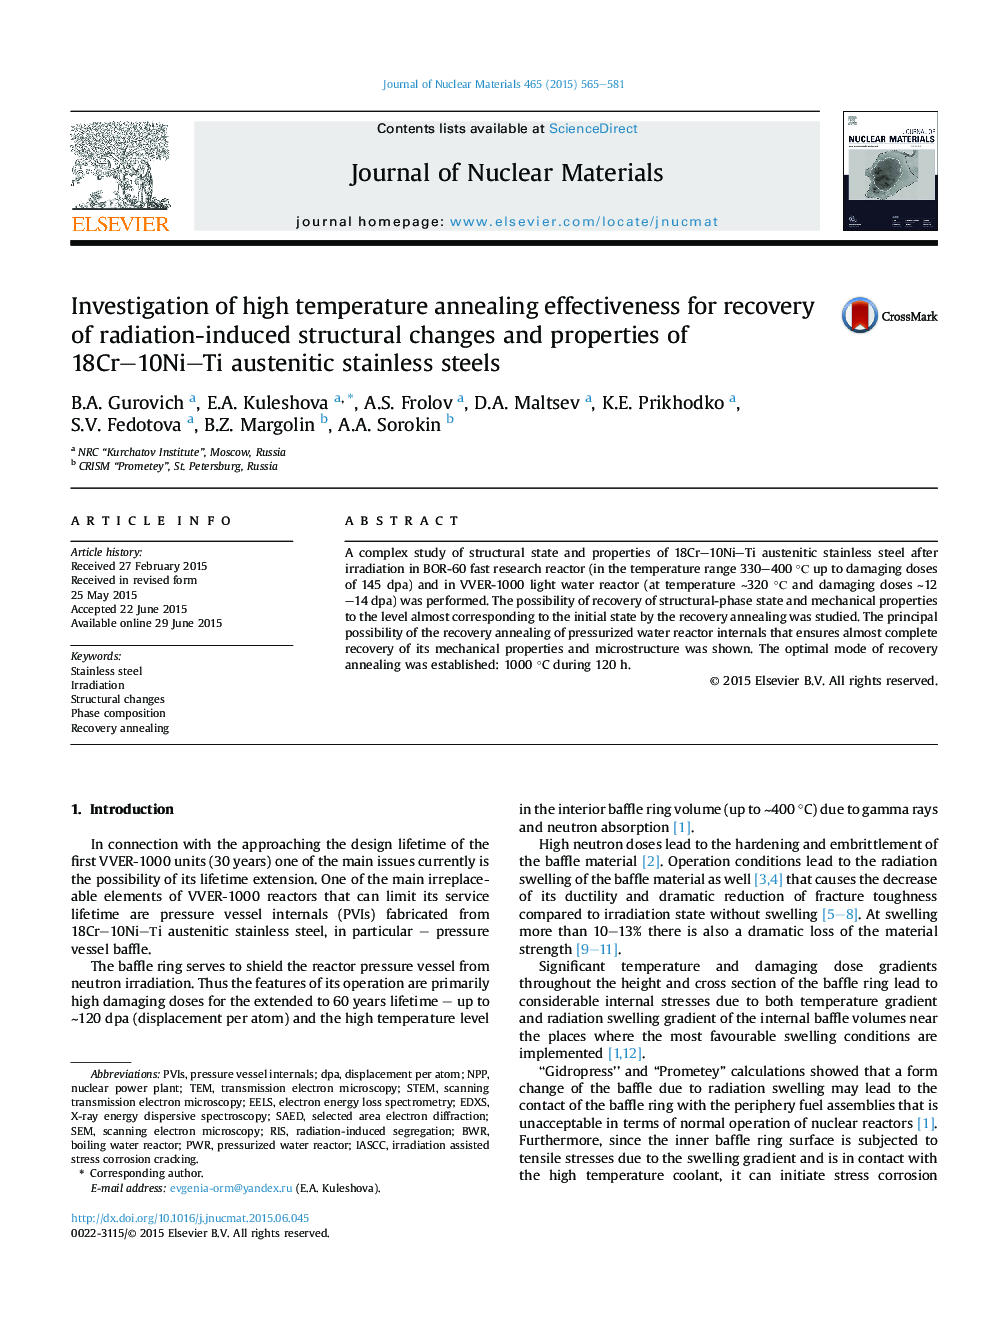 Investigation of high temperature annealing effectiveness for recovery of radiation-induced structural changes and properties of 18Cr-10Ni-Ti austenitic stainless steels